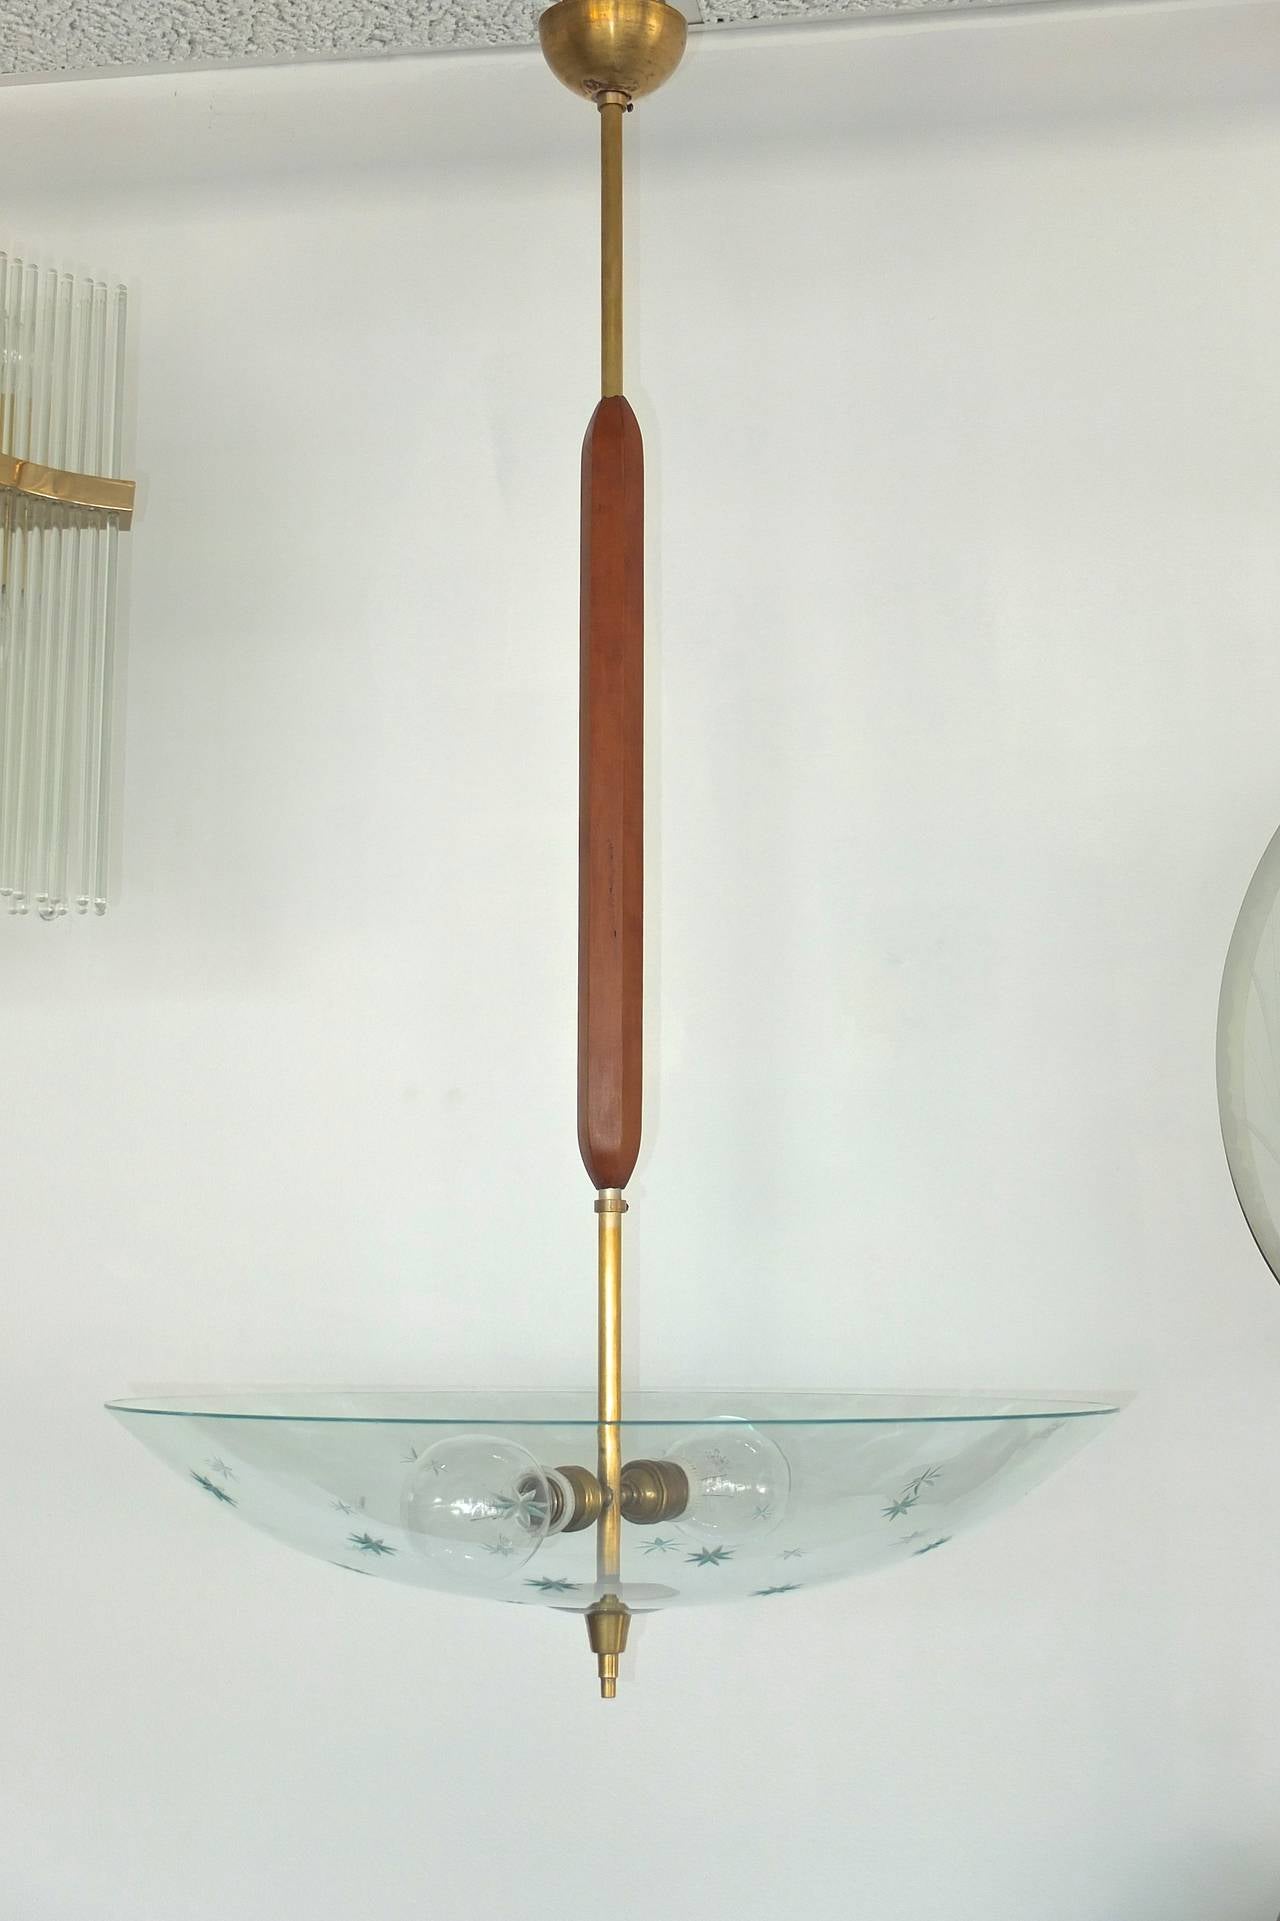 Unusual vintage Italian suspension lamp from the late 1950's early 1960's with a solid brass stem 39